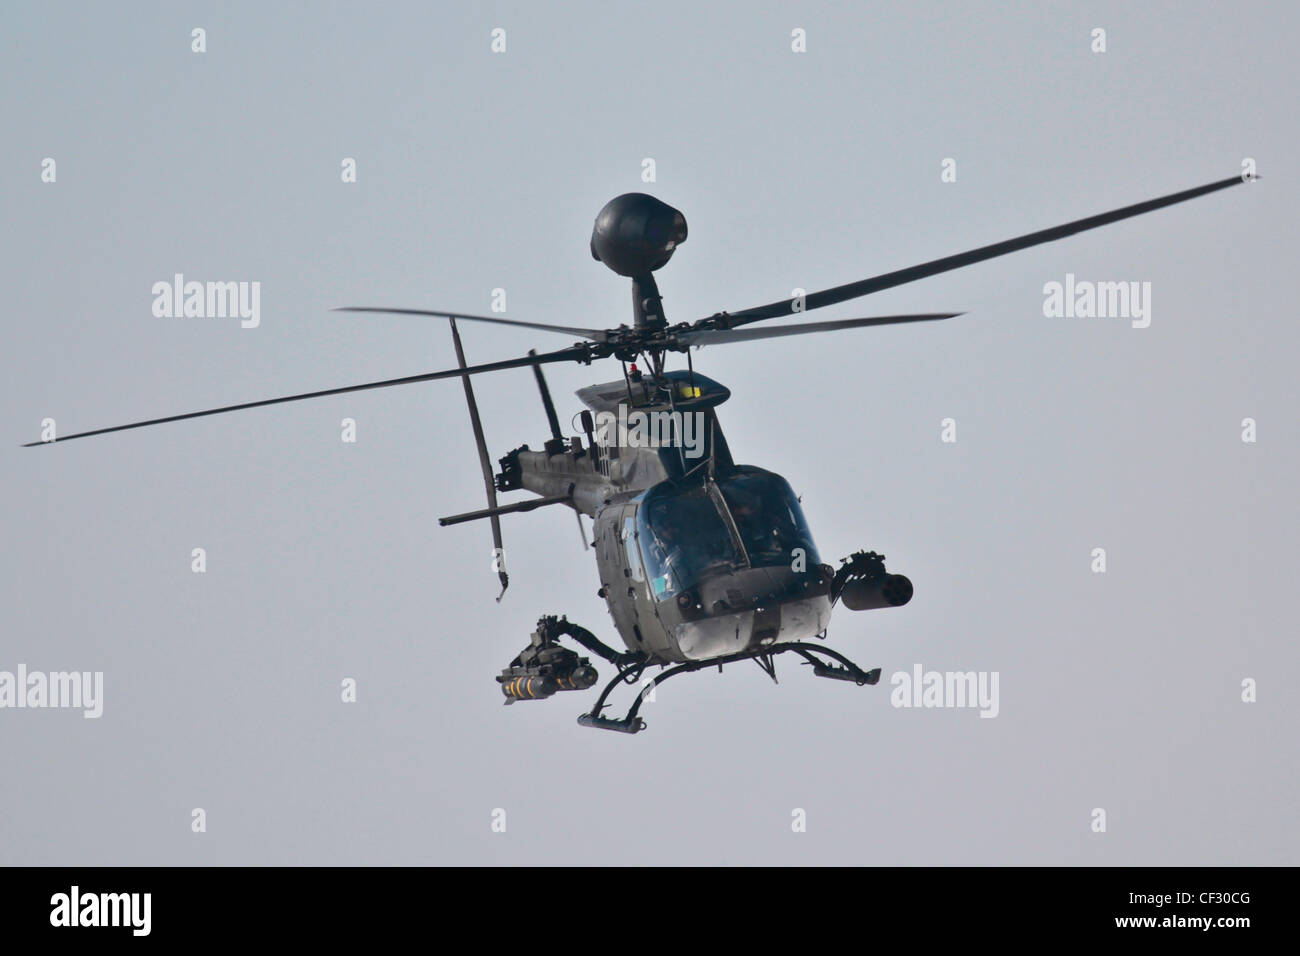 OH-58F CASUP model - Vertical Flight Photo Gallery